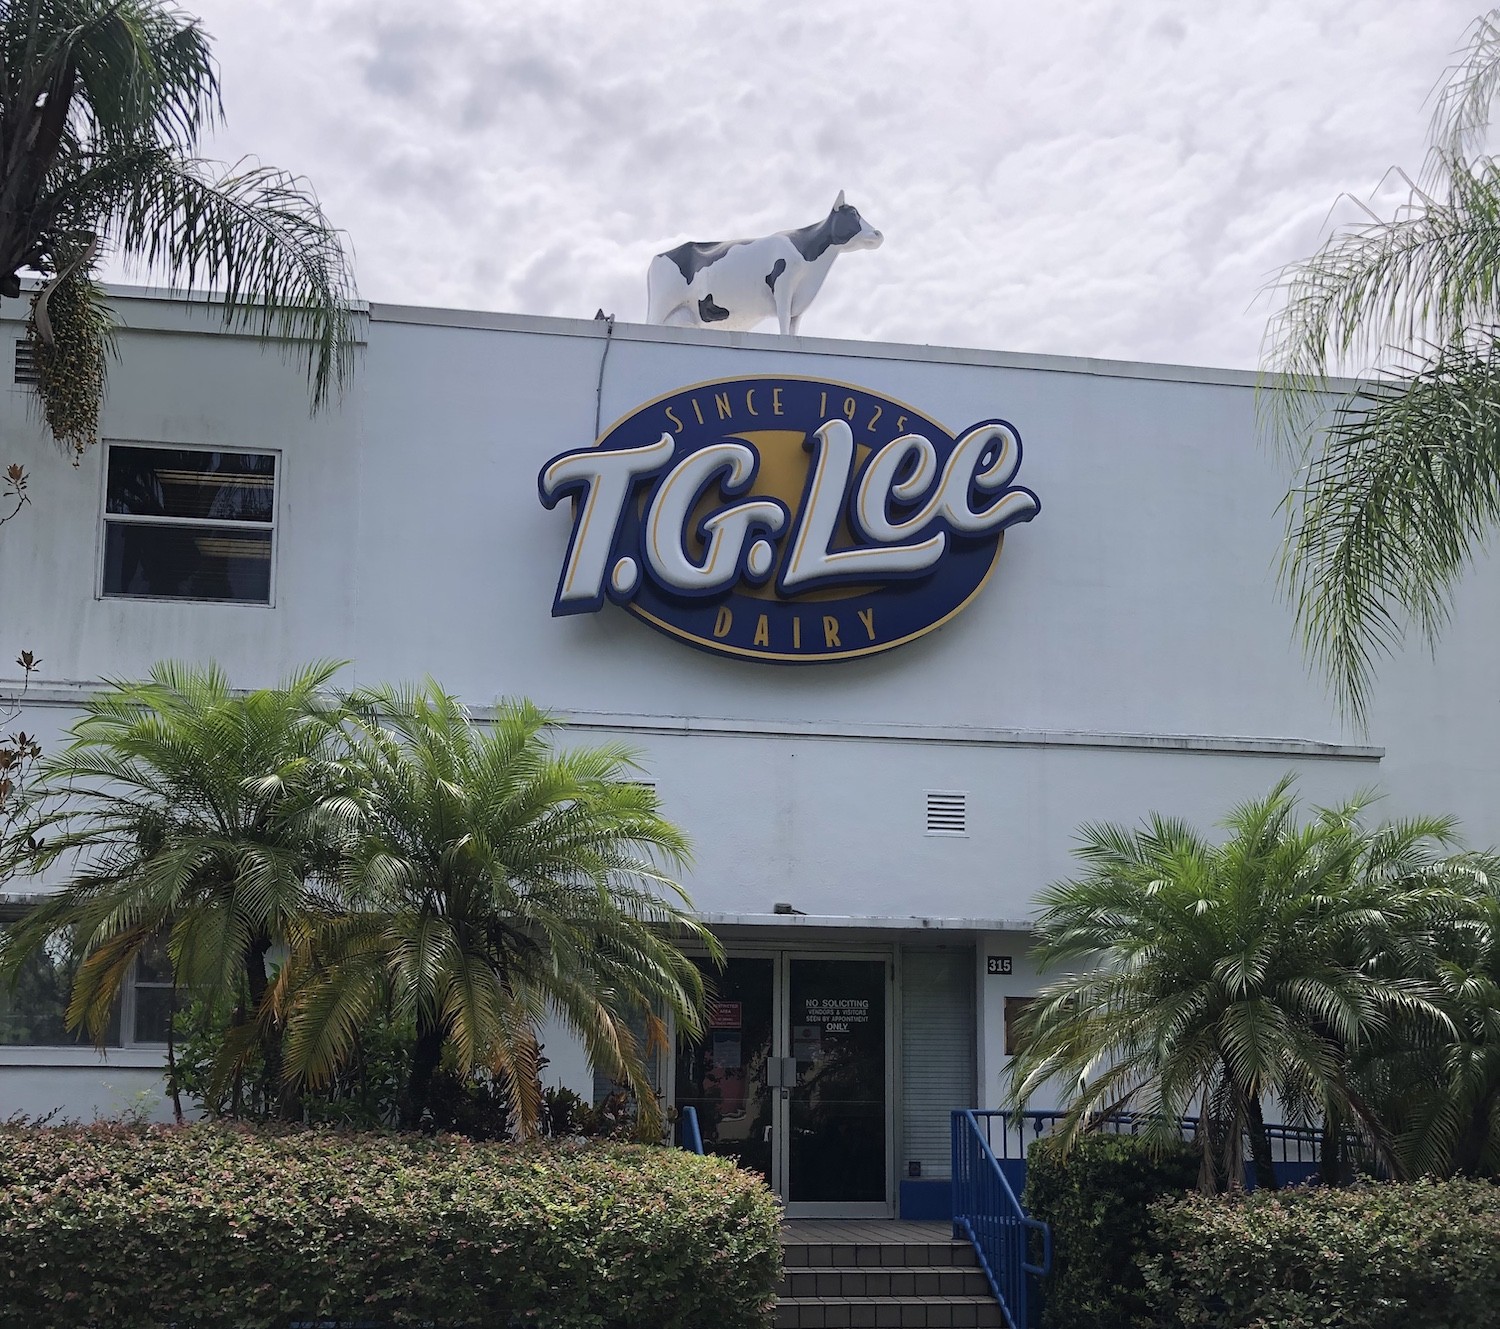 Party in the shadow of the cow in Orlando's Milk District